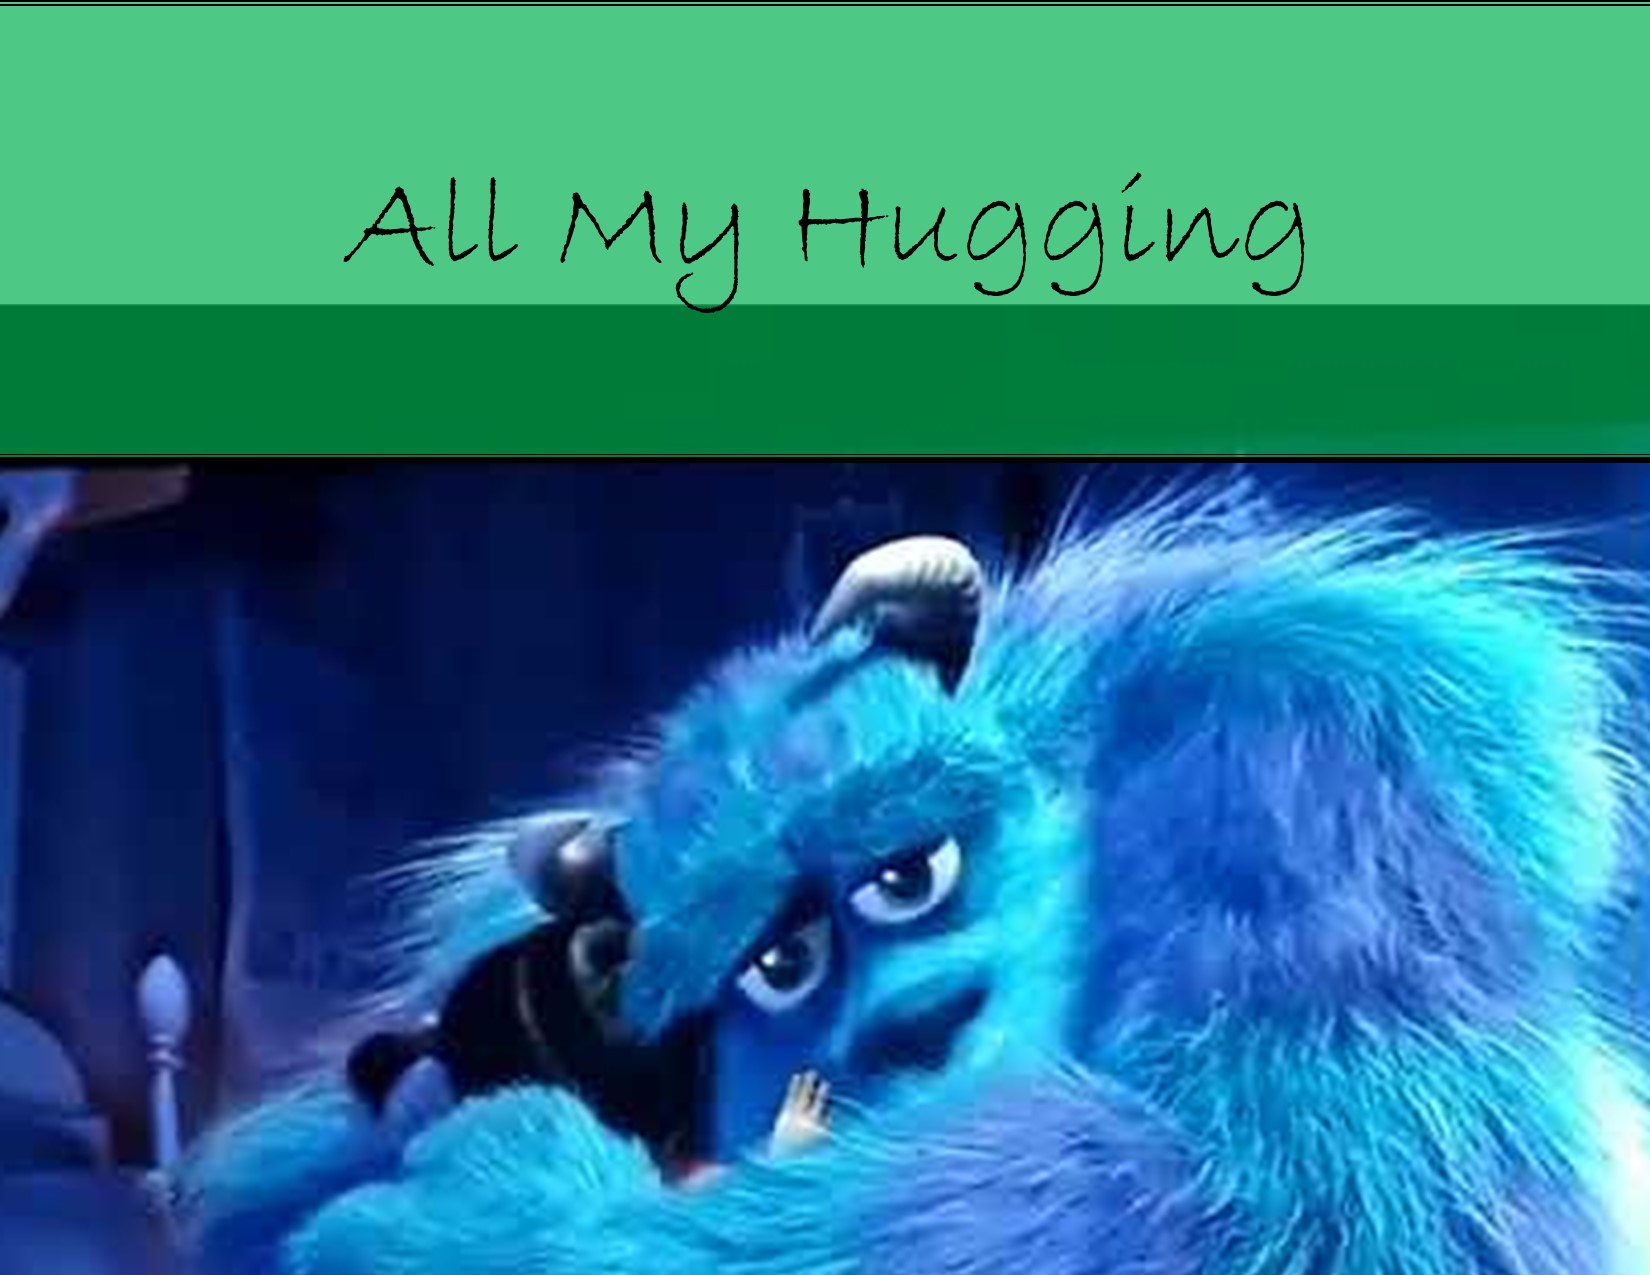 All My Hugging (thank you, The Beatles!)